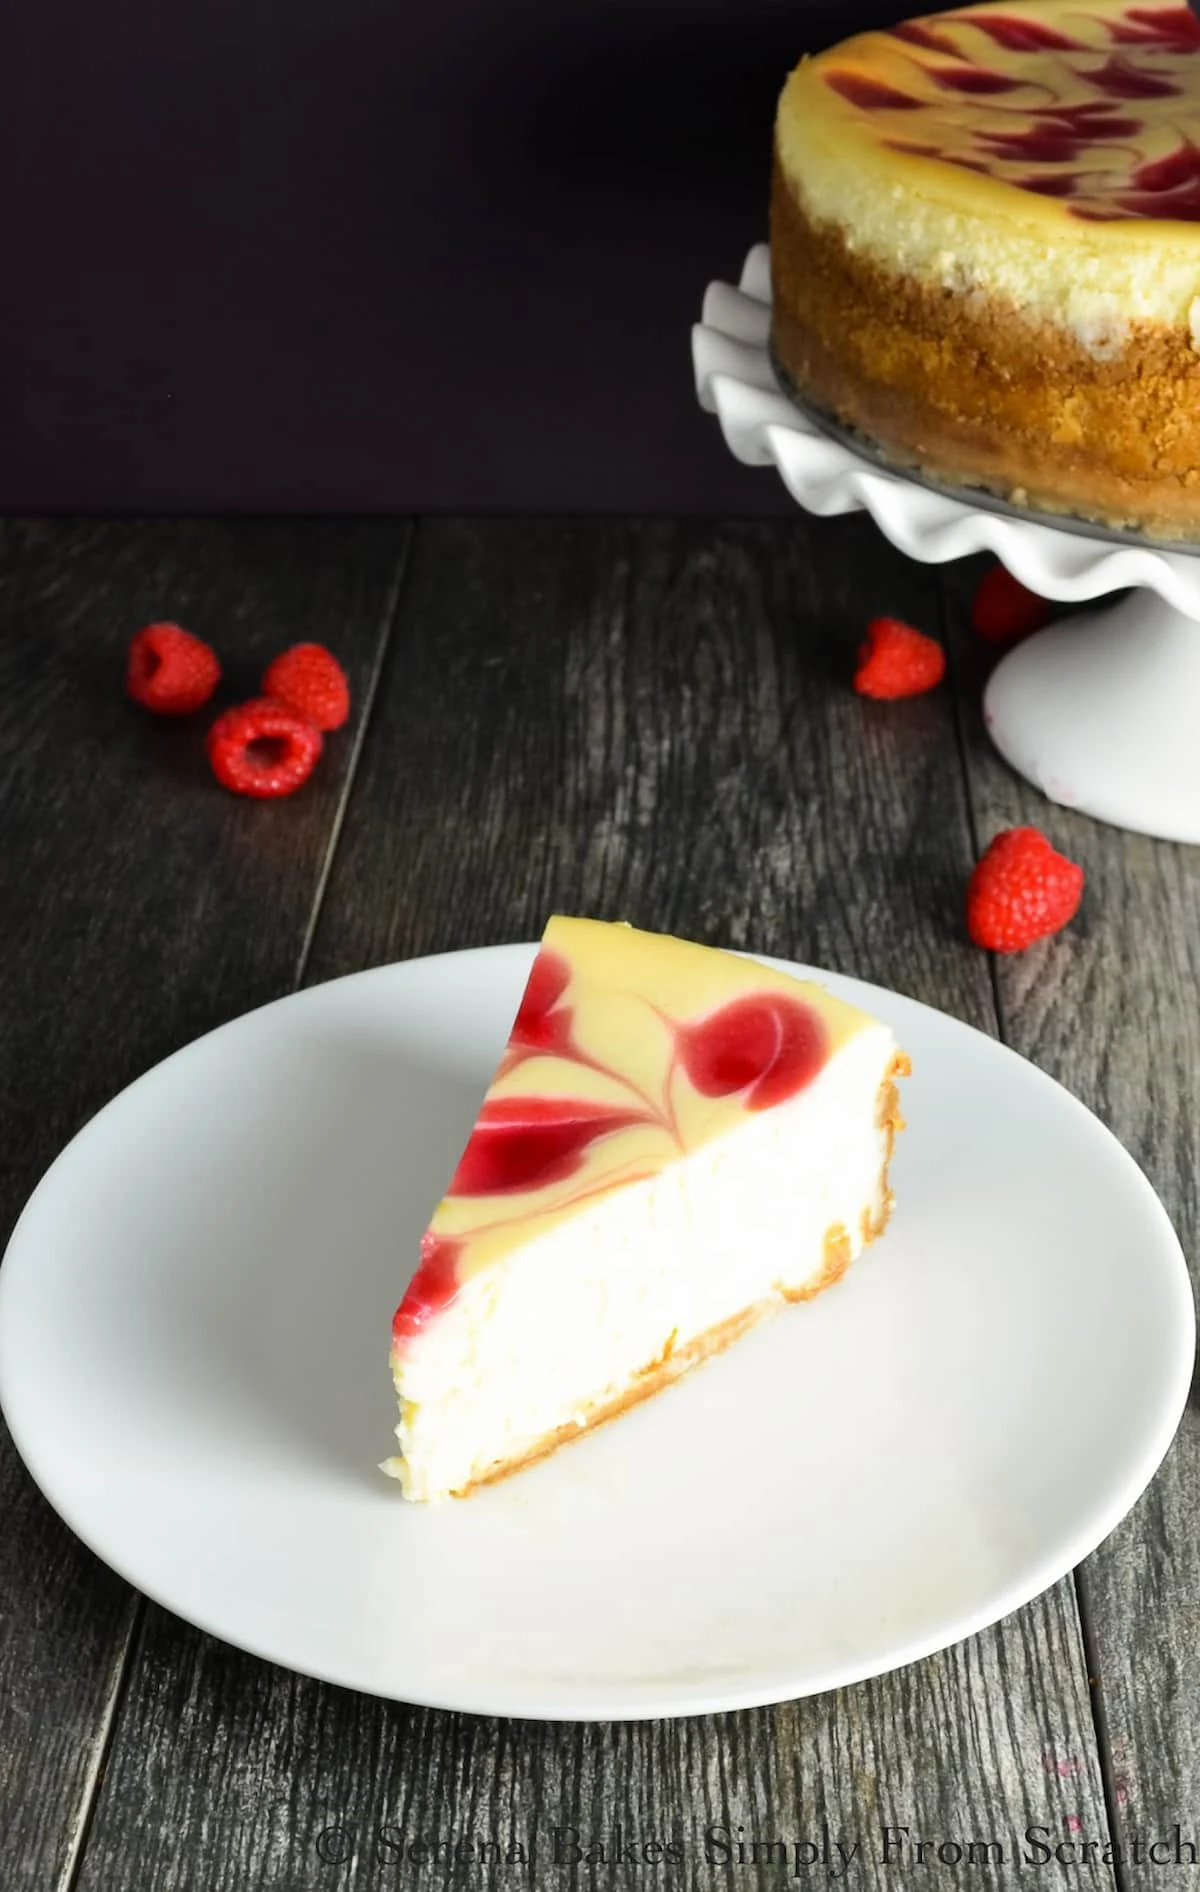 A side shot of a Tall Creamy Cheesecake with Raspberry Swirl slice on a white plate with a whole Cheesecake in the background on a white cake stand.